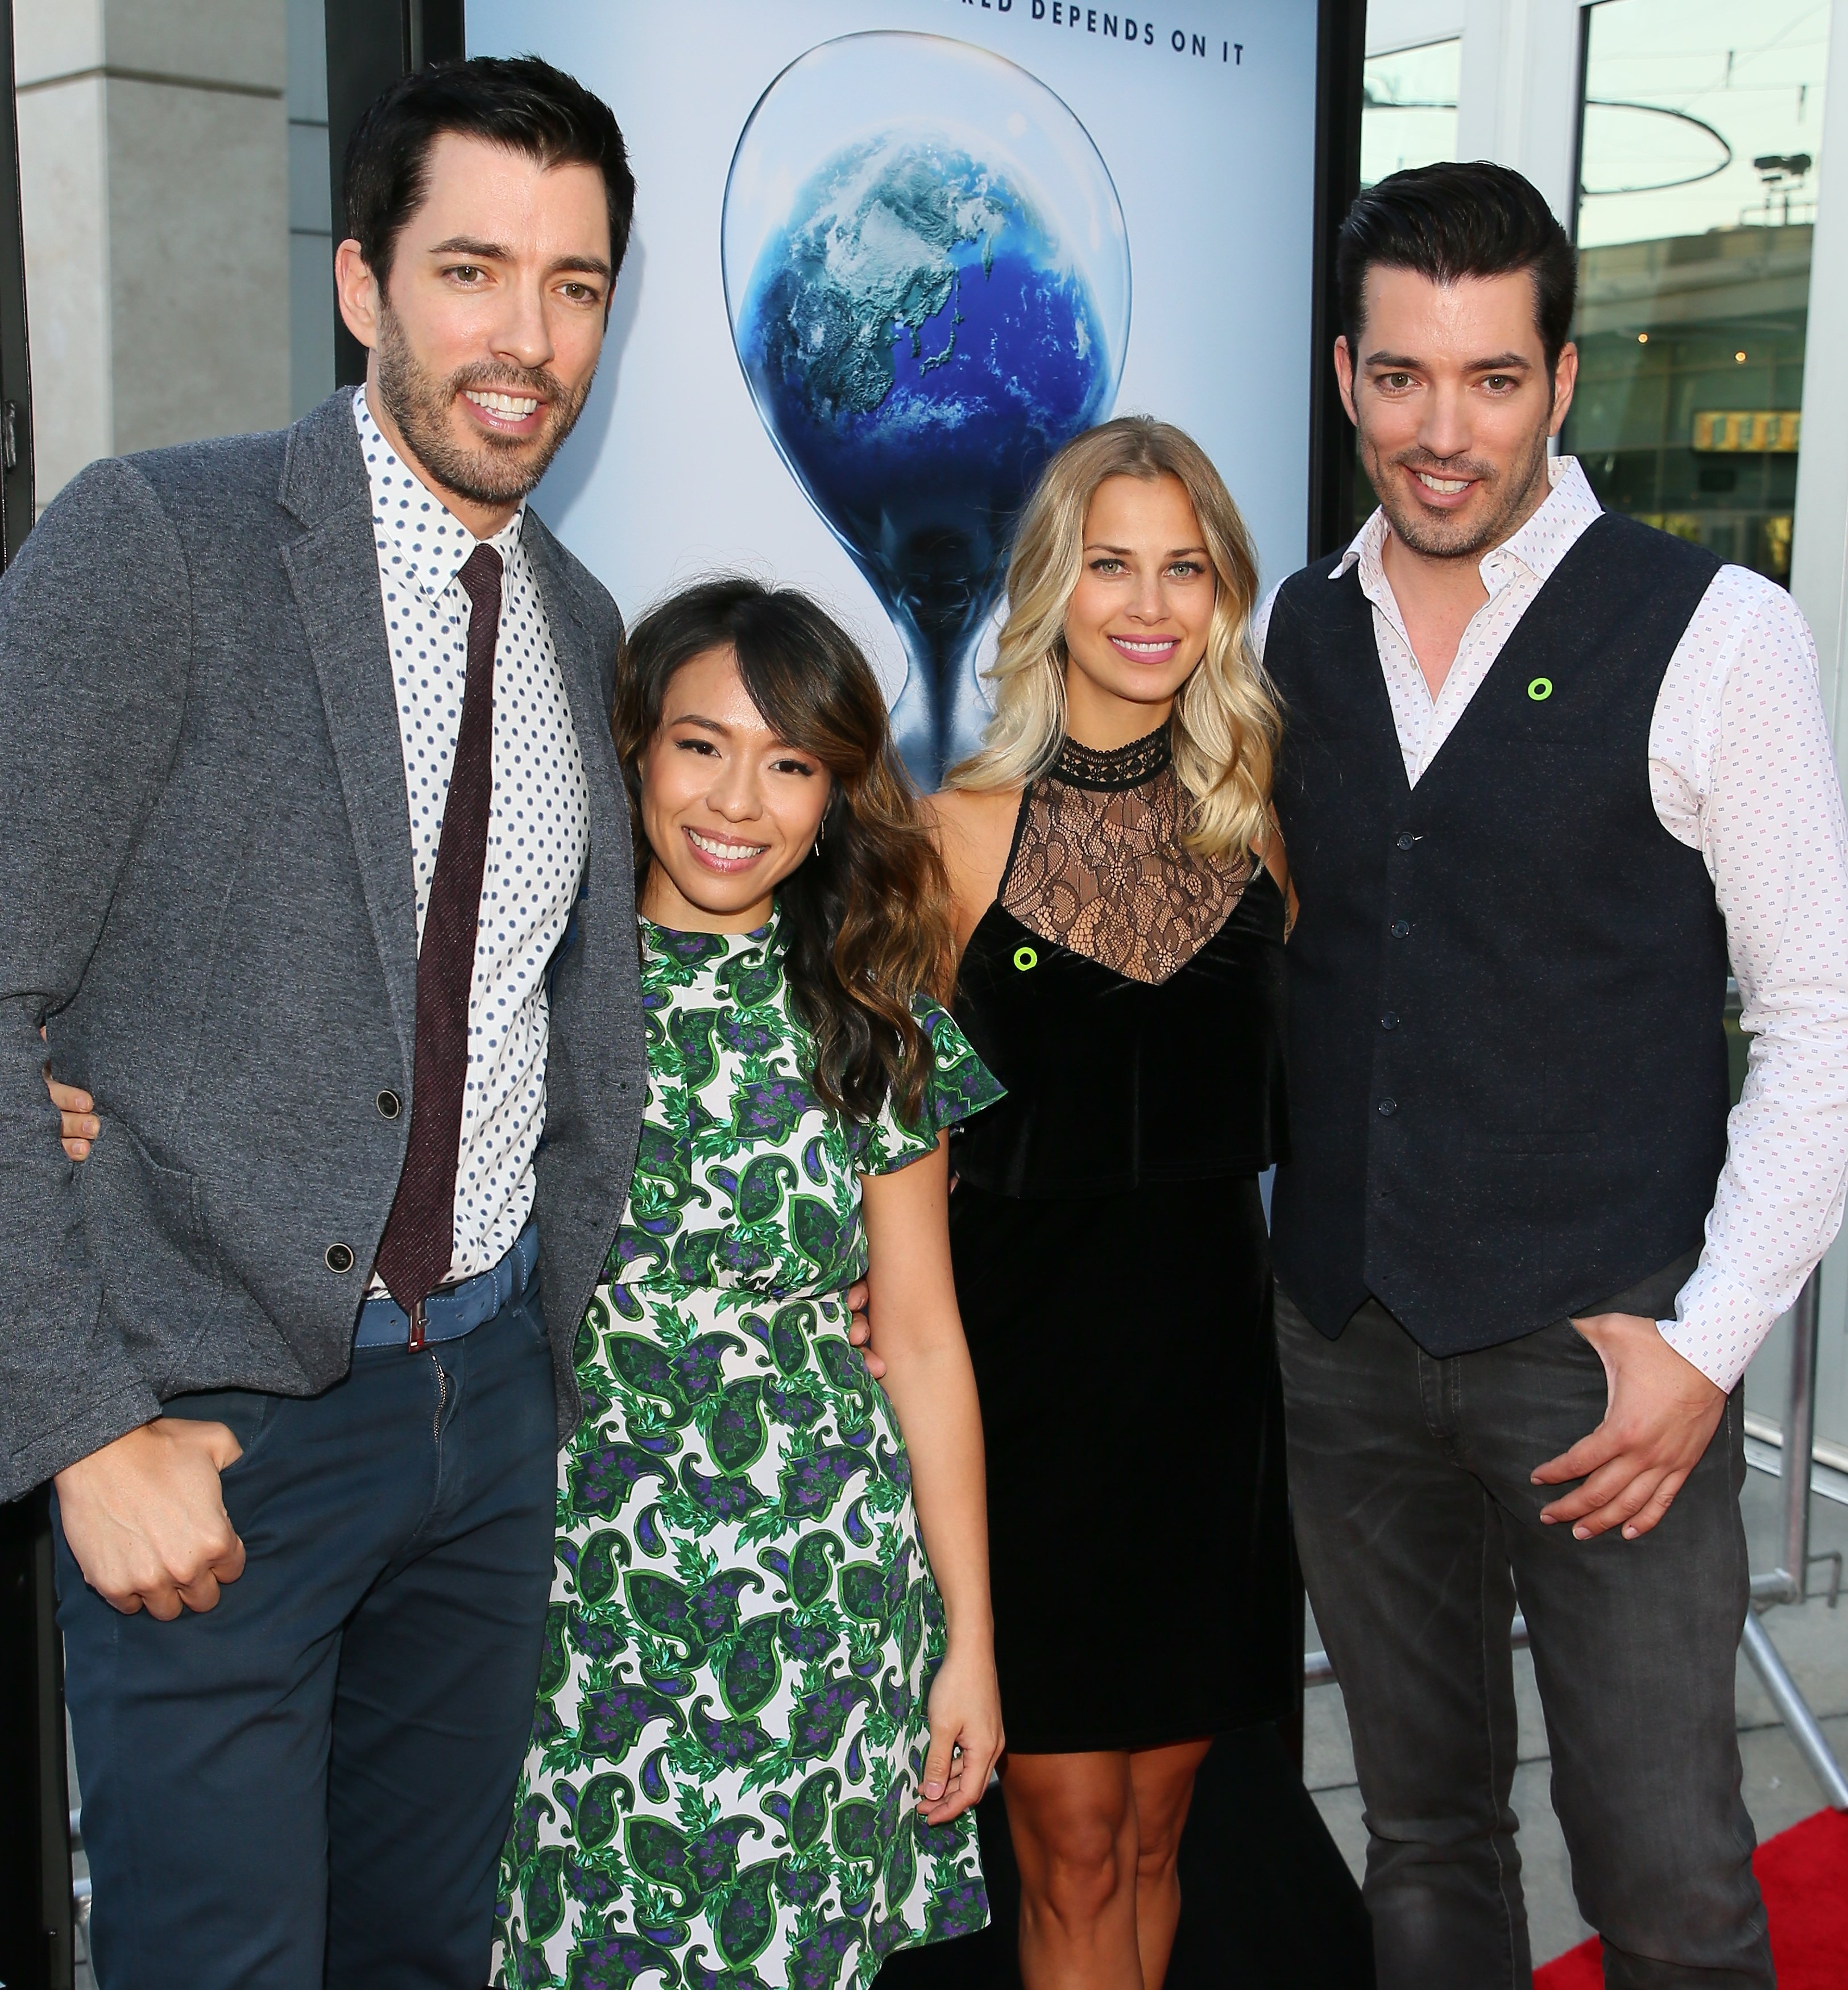 rew Scott, Linda Phan, Jacinta Kuznetsov and Jonathan Scott attend a screening of Paramount Pictures' "An Inconvenient Sequel: Truth To Power" on July 25, 2017 in Hollywood, California | Source: Getty Images